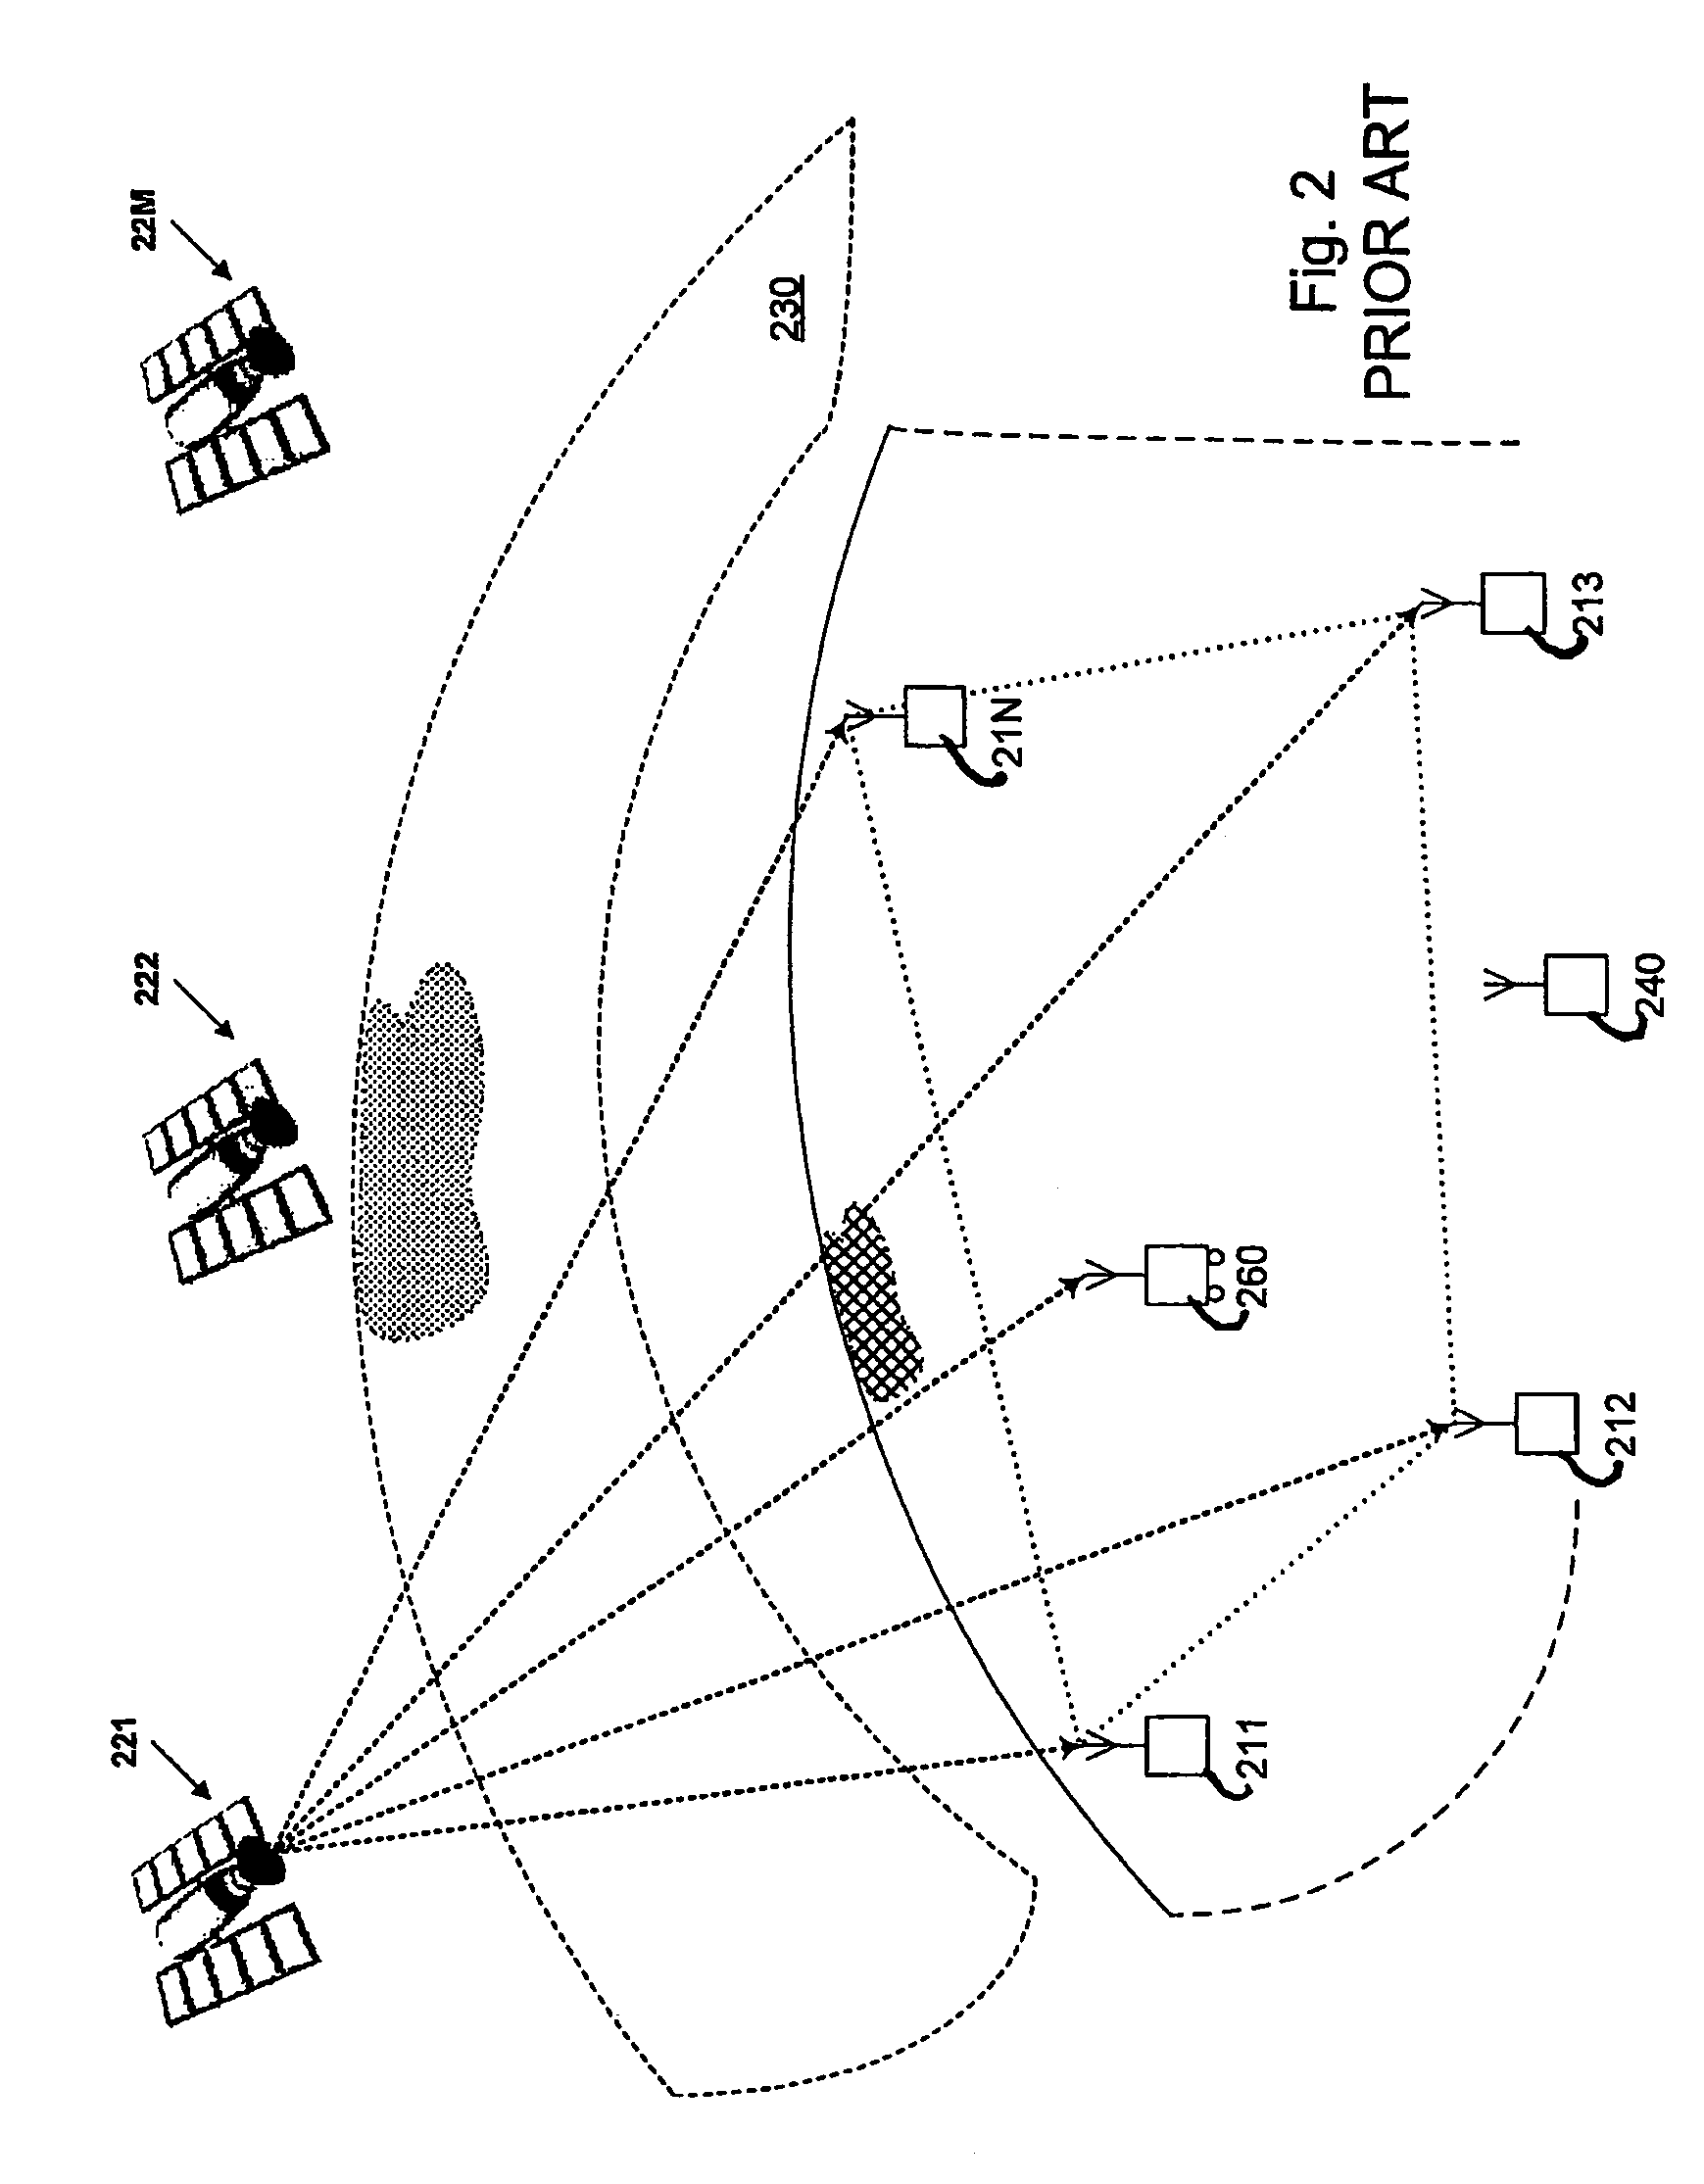 Ionosphere modeling apparatus and methods